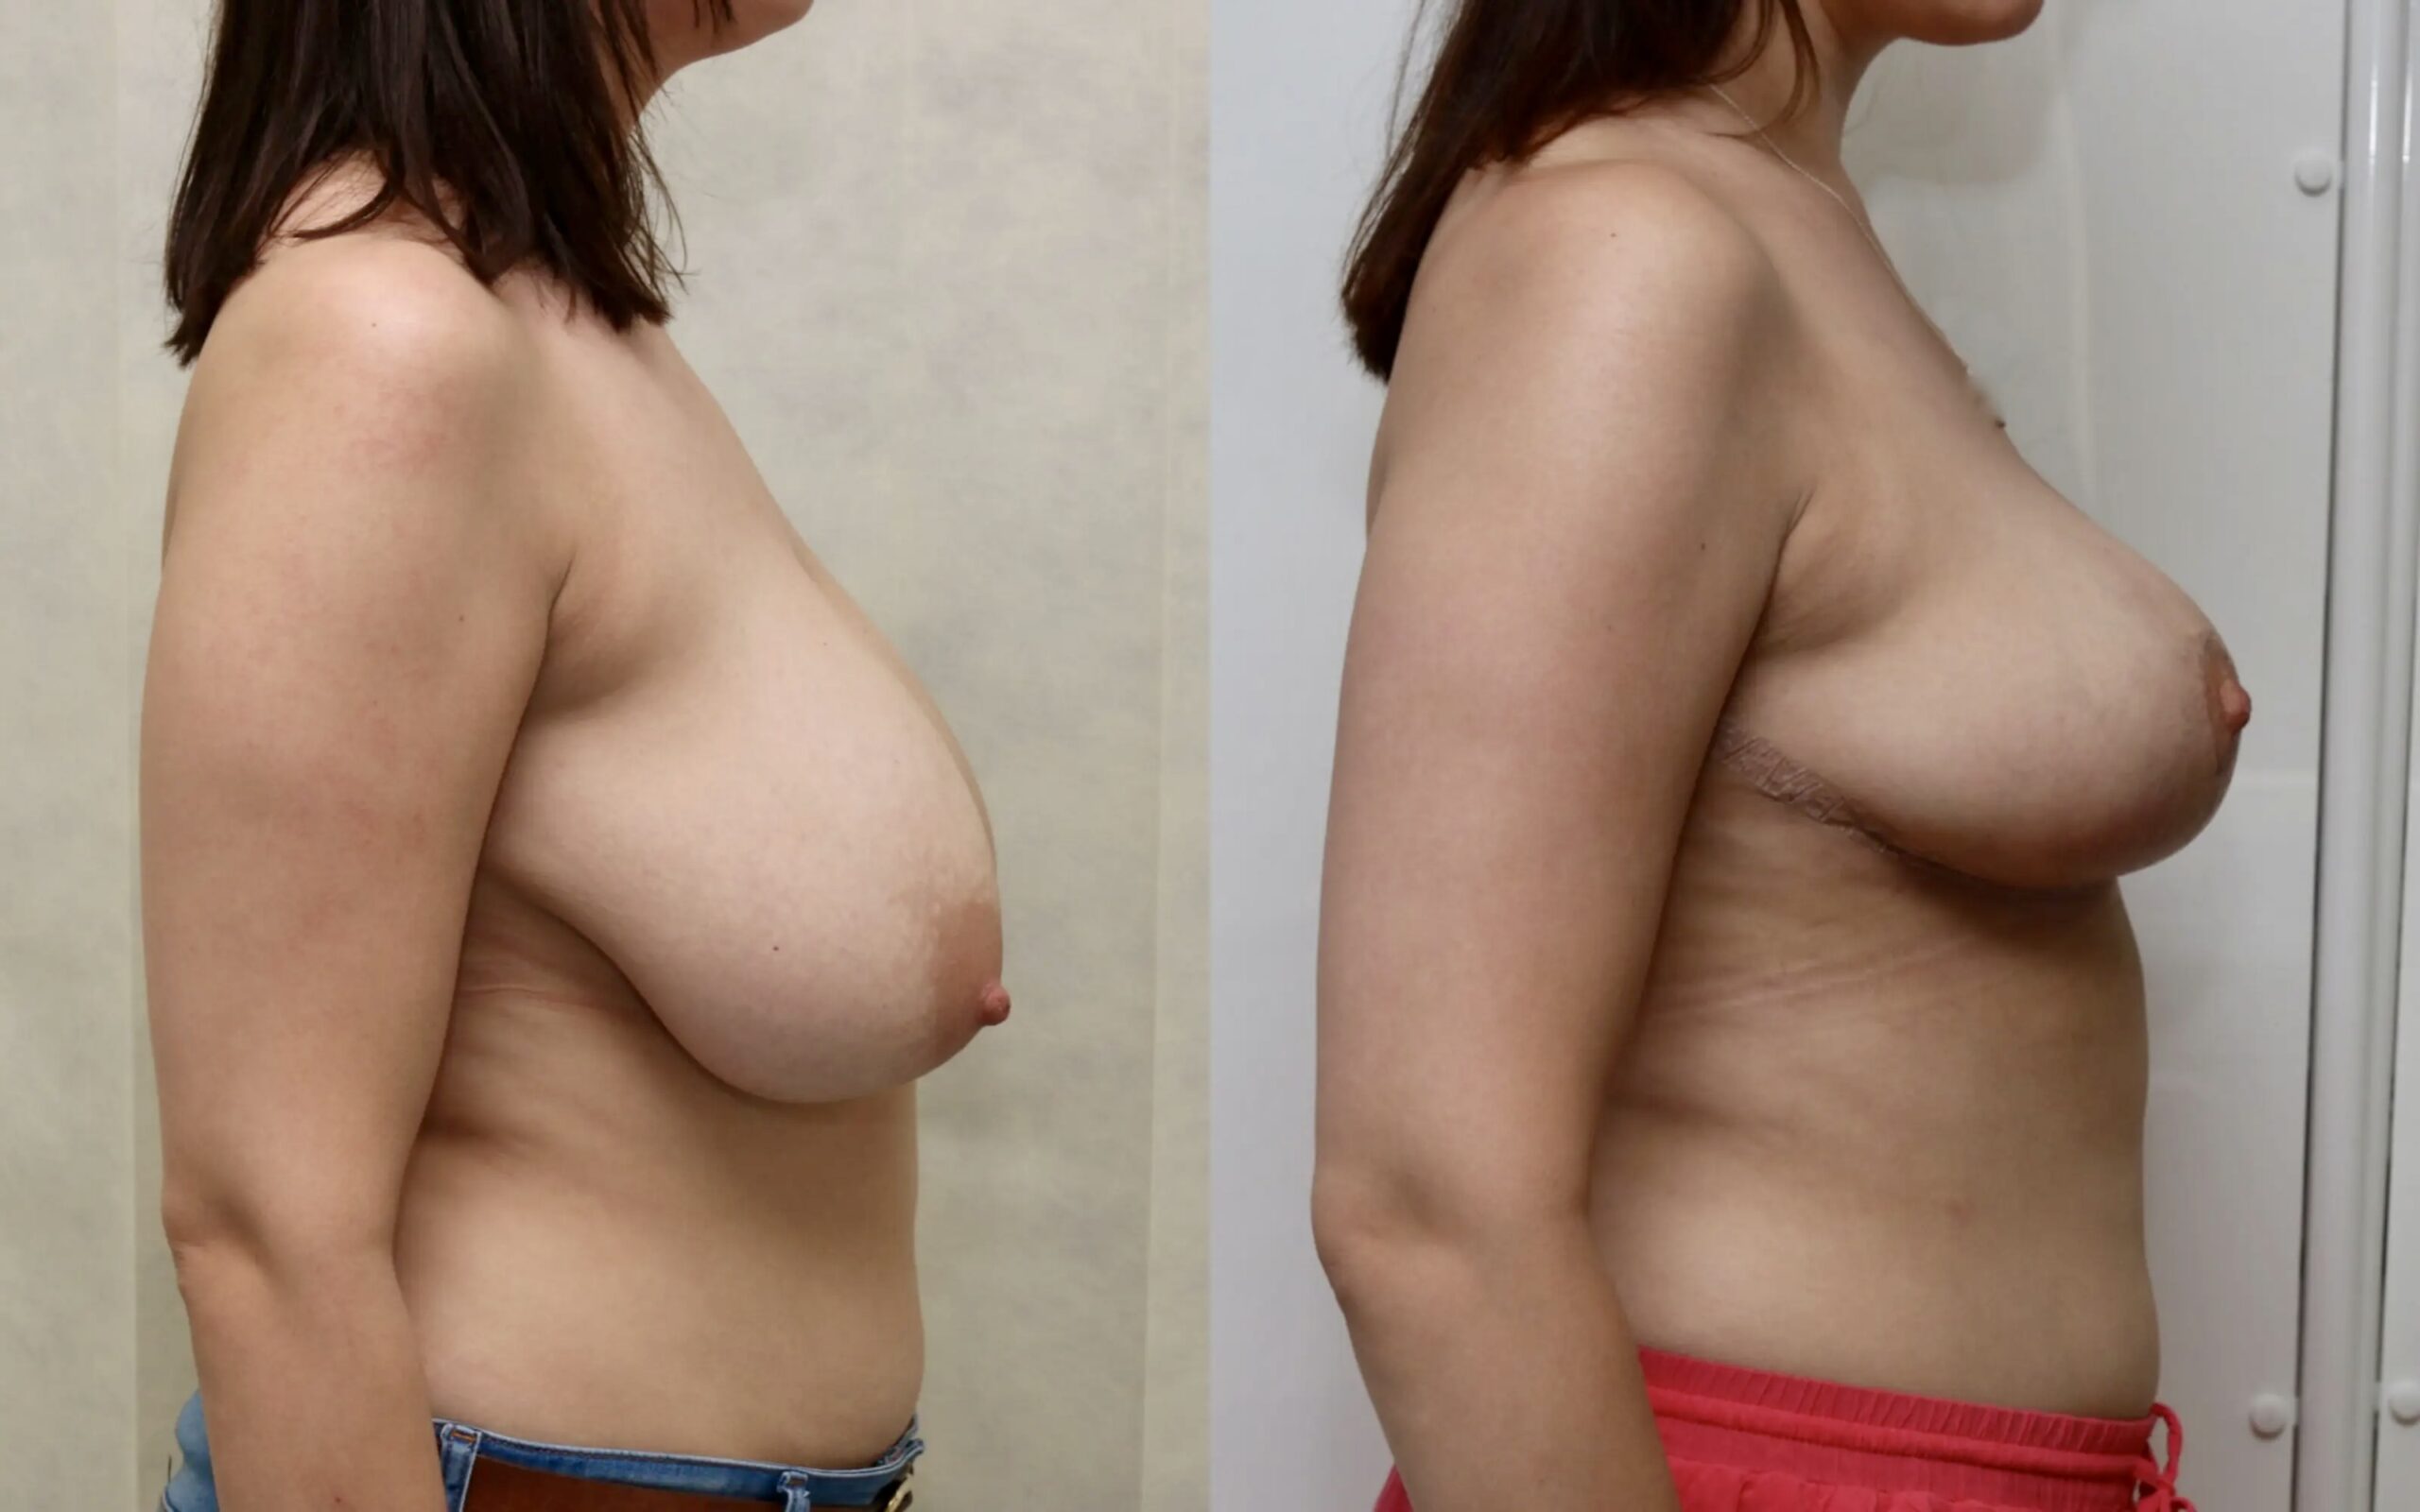 Breast reduction results at four weeks and six months